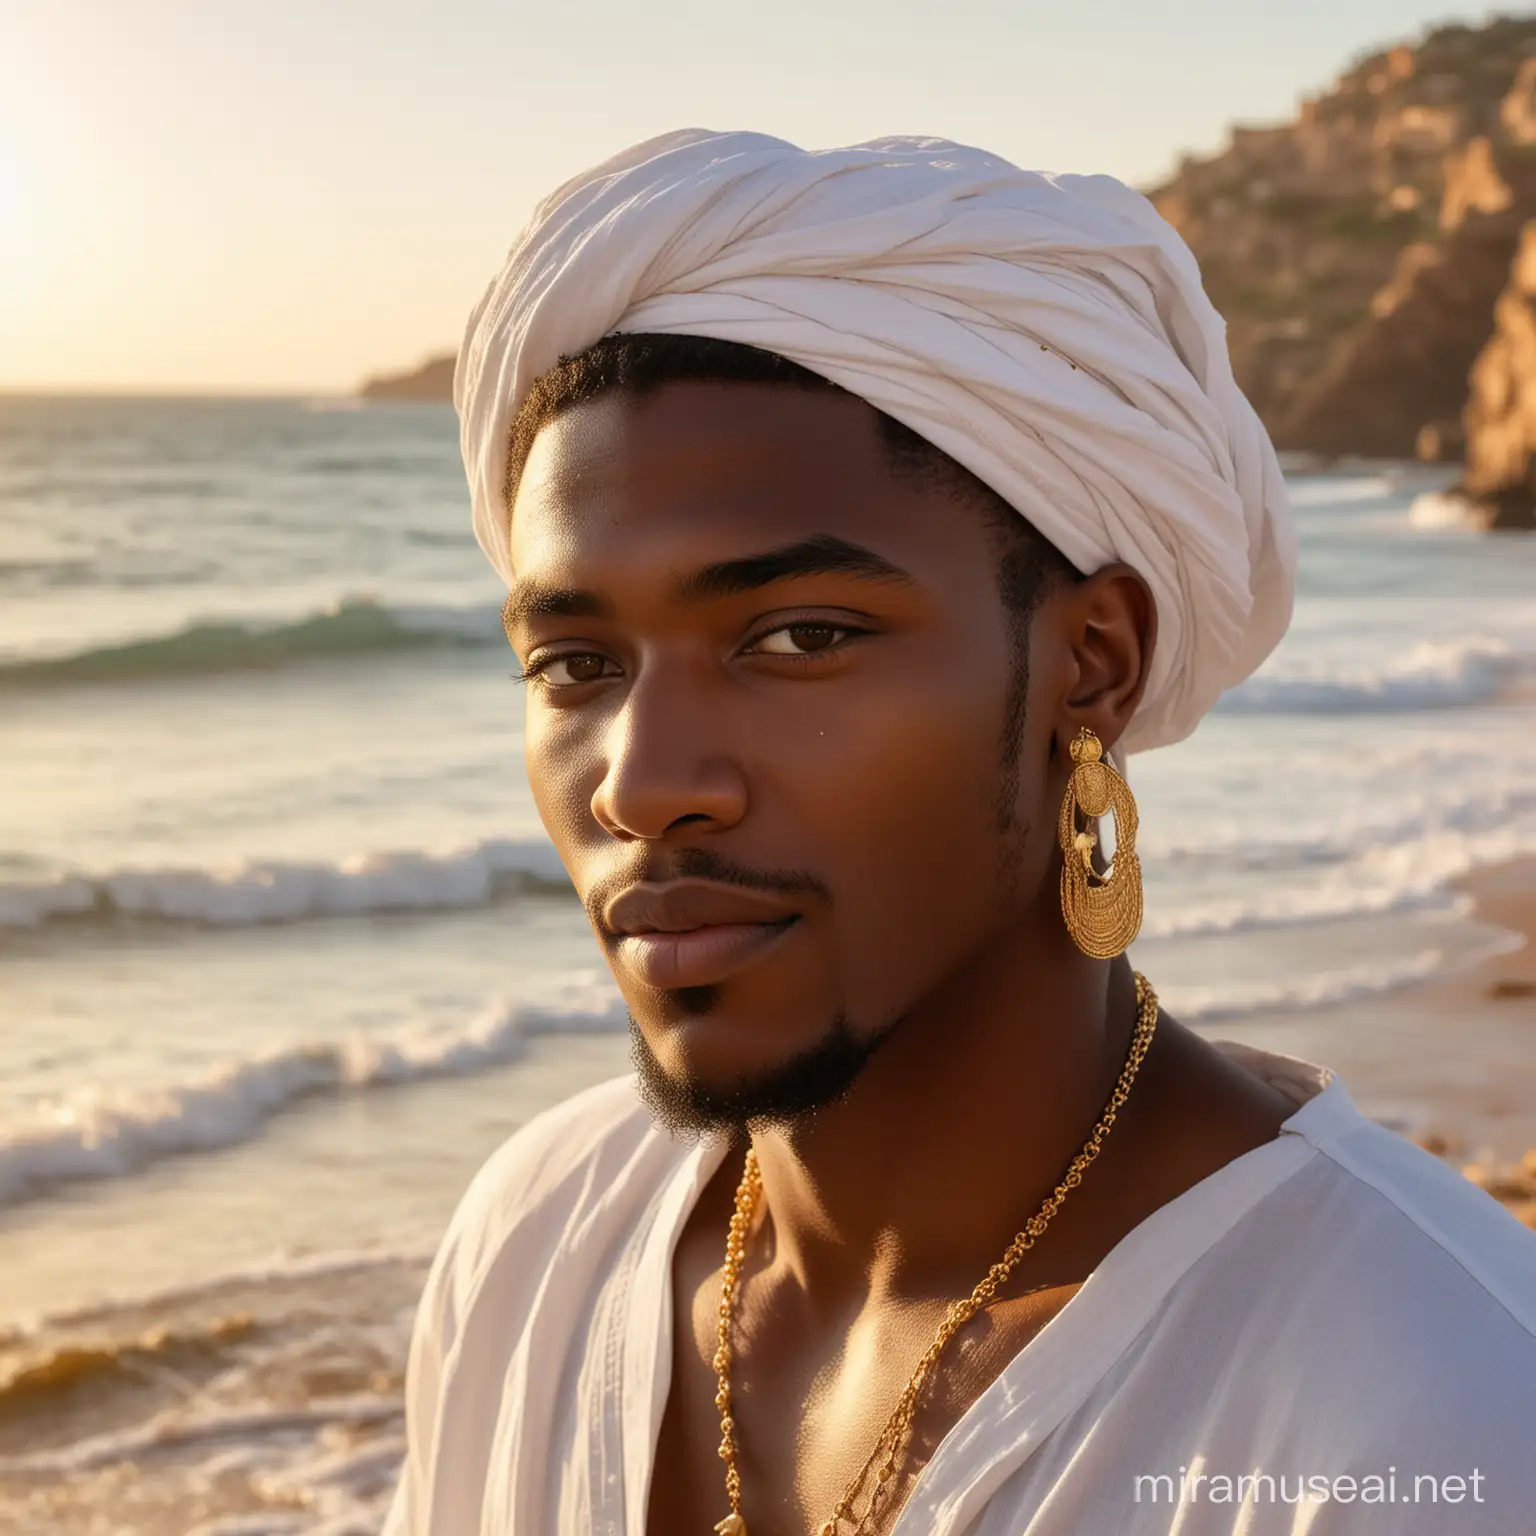 Youthful Ancient Black Israelite by the Ocean in a Vibrant Sunlit Setting